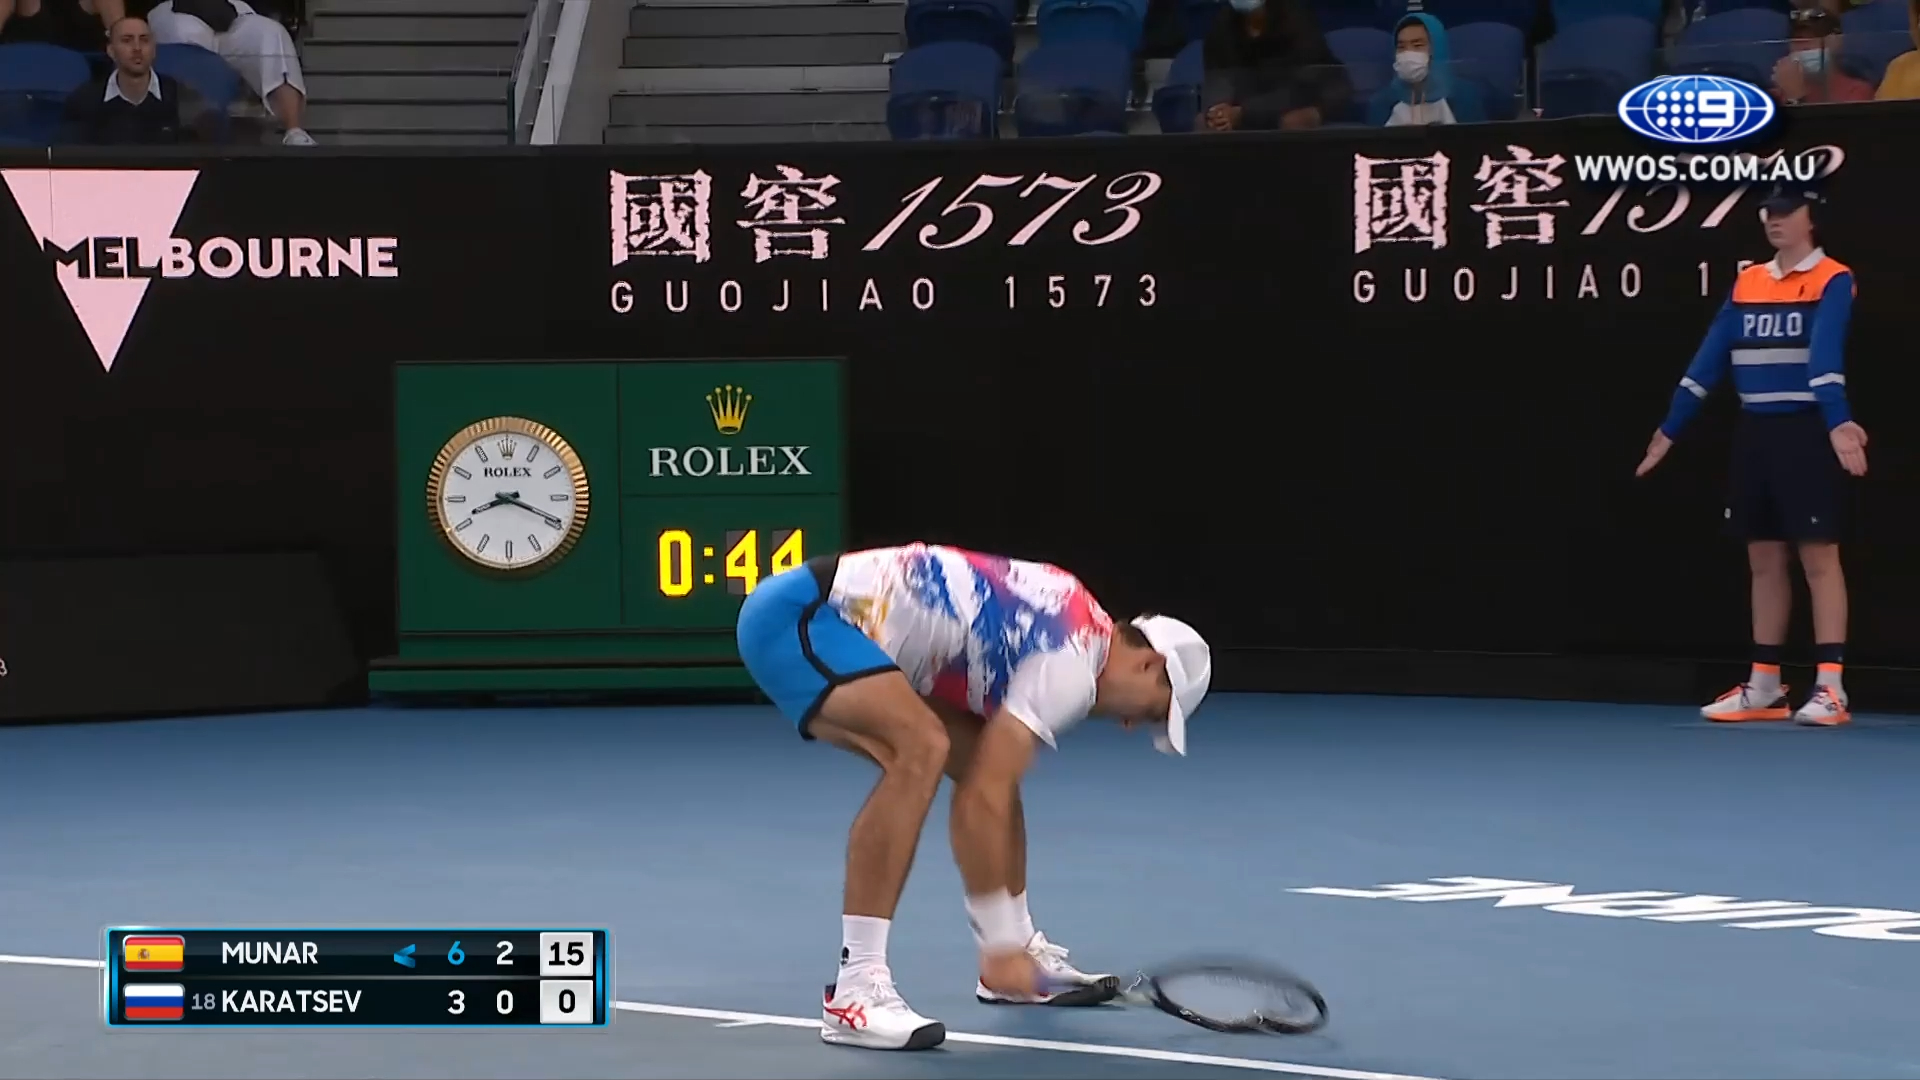 Karatsev skies a ball, takes his frustrations on racquet